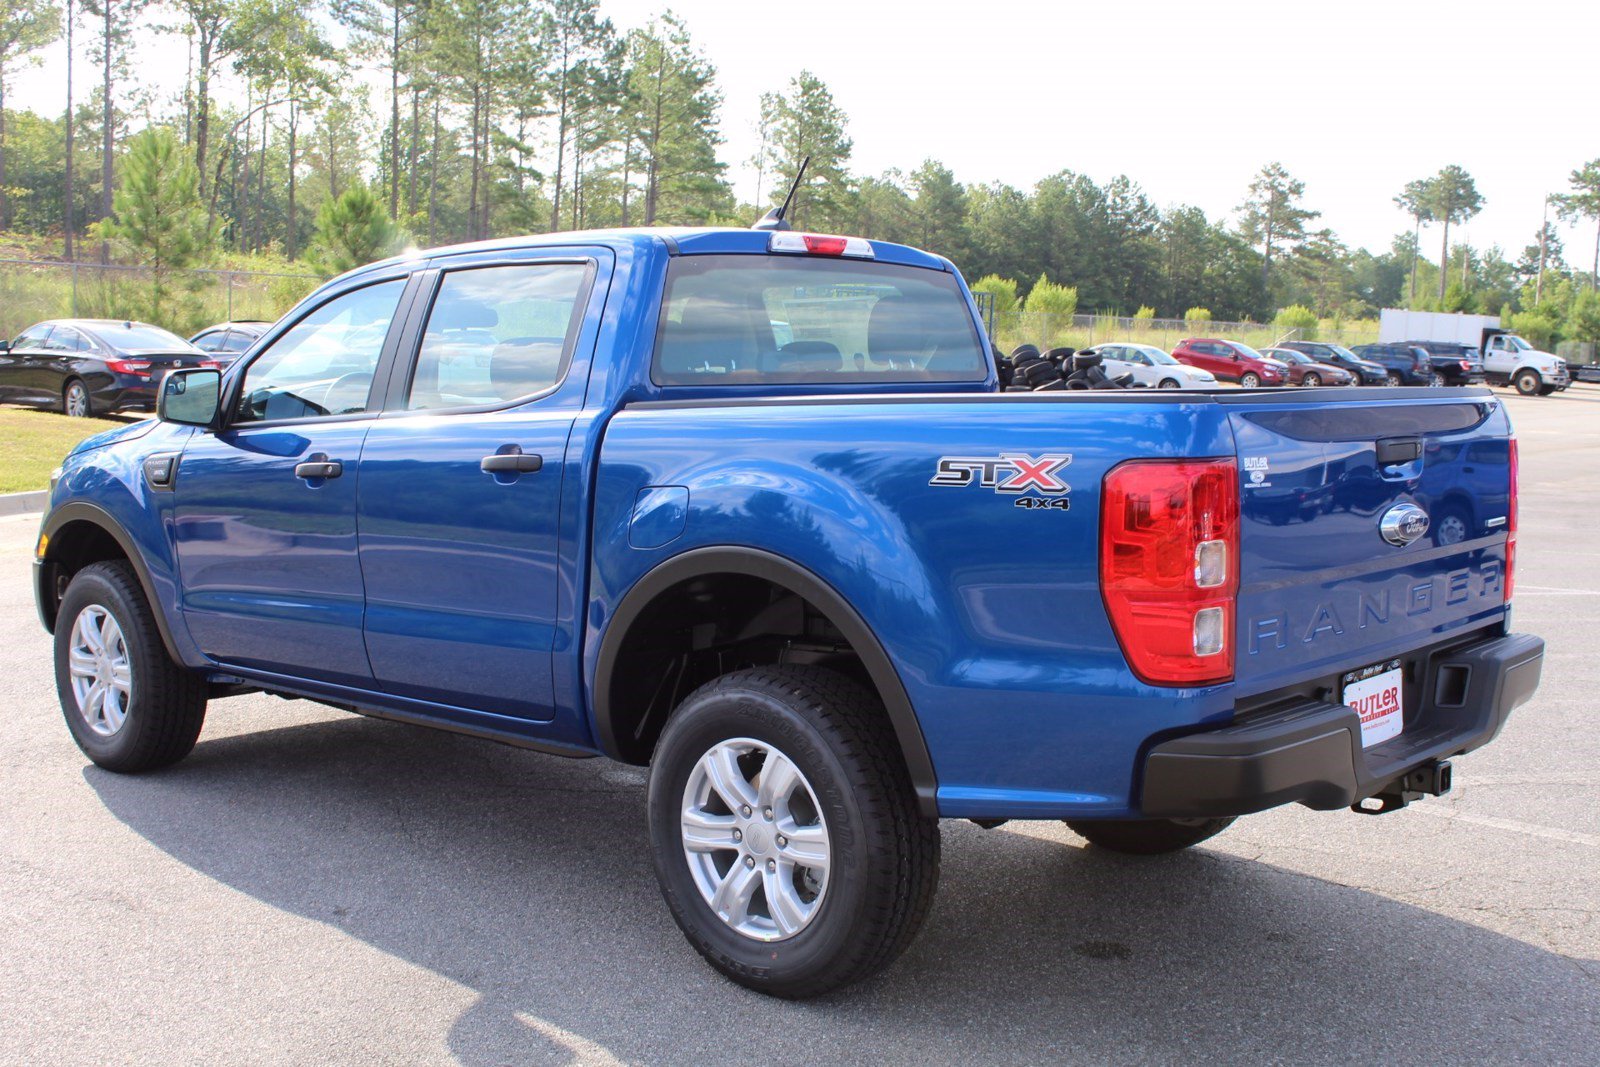 New 2020 Ford Ranger XL Crew Cab Pickup in Milledgeville #F20139